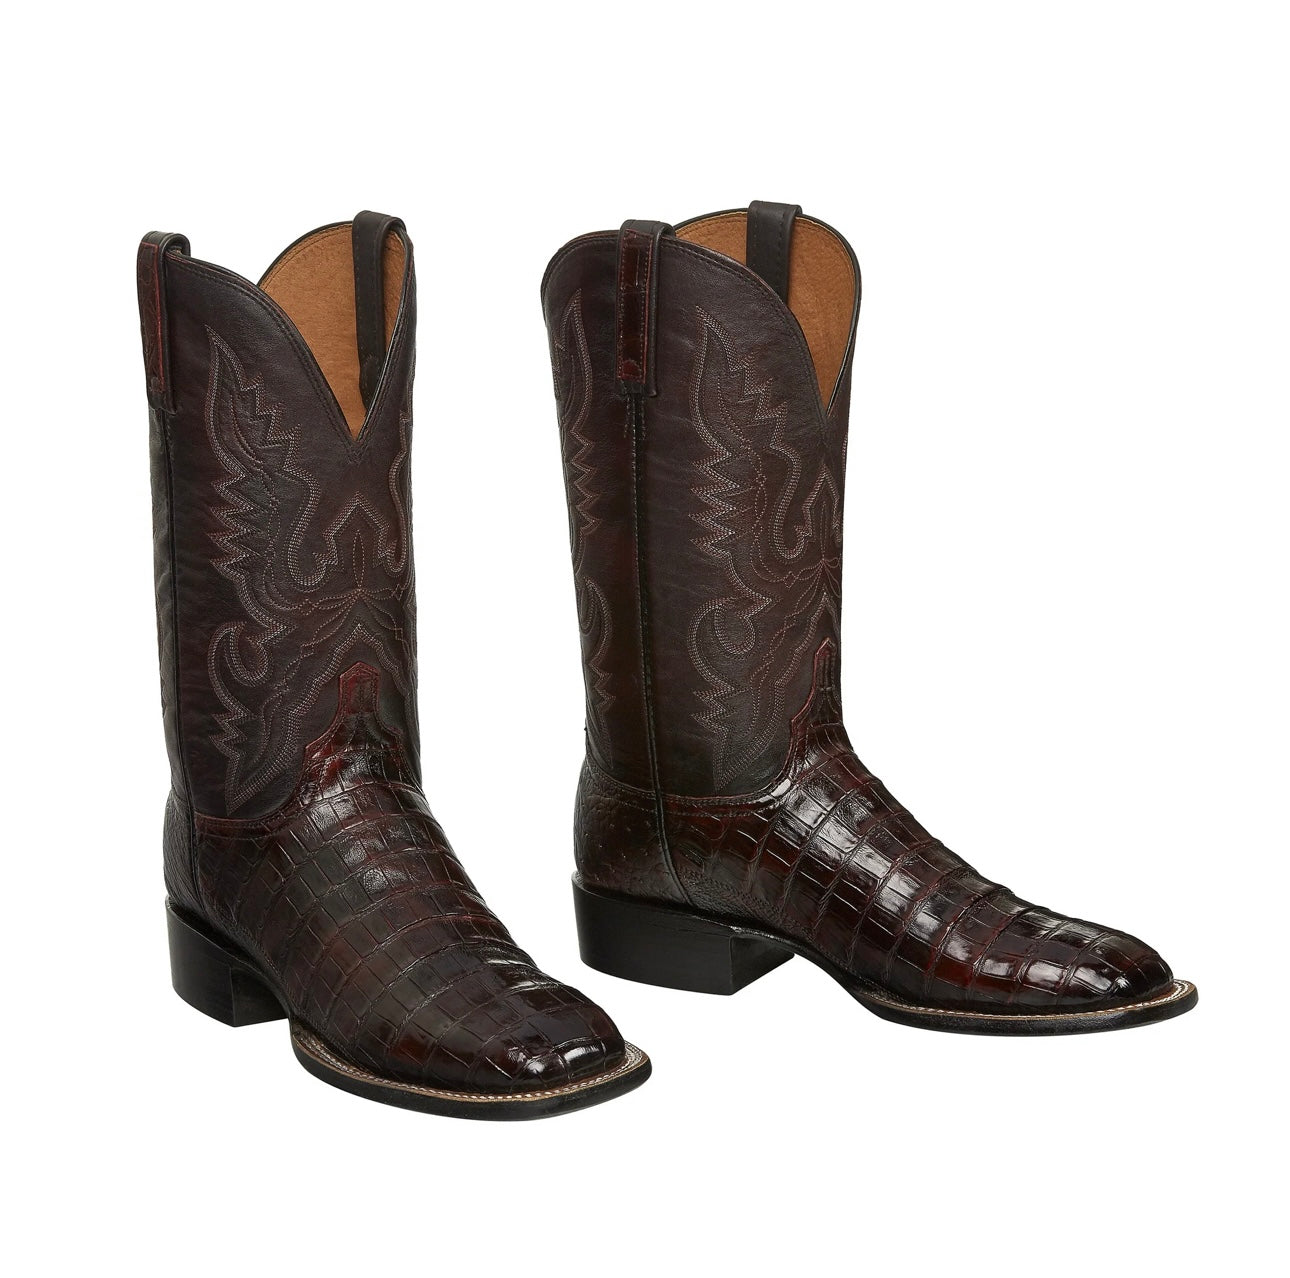 LUCCHESE “TRENT” Caiman/SM Ostrich Boots